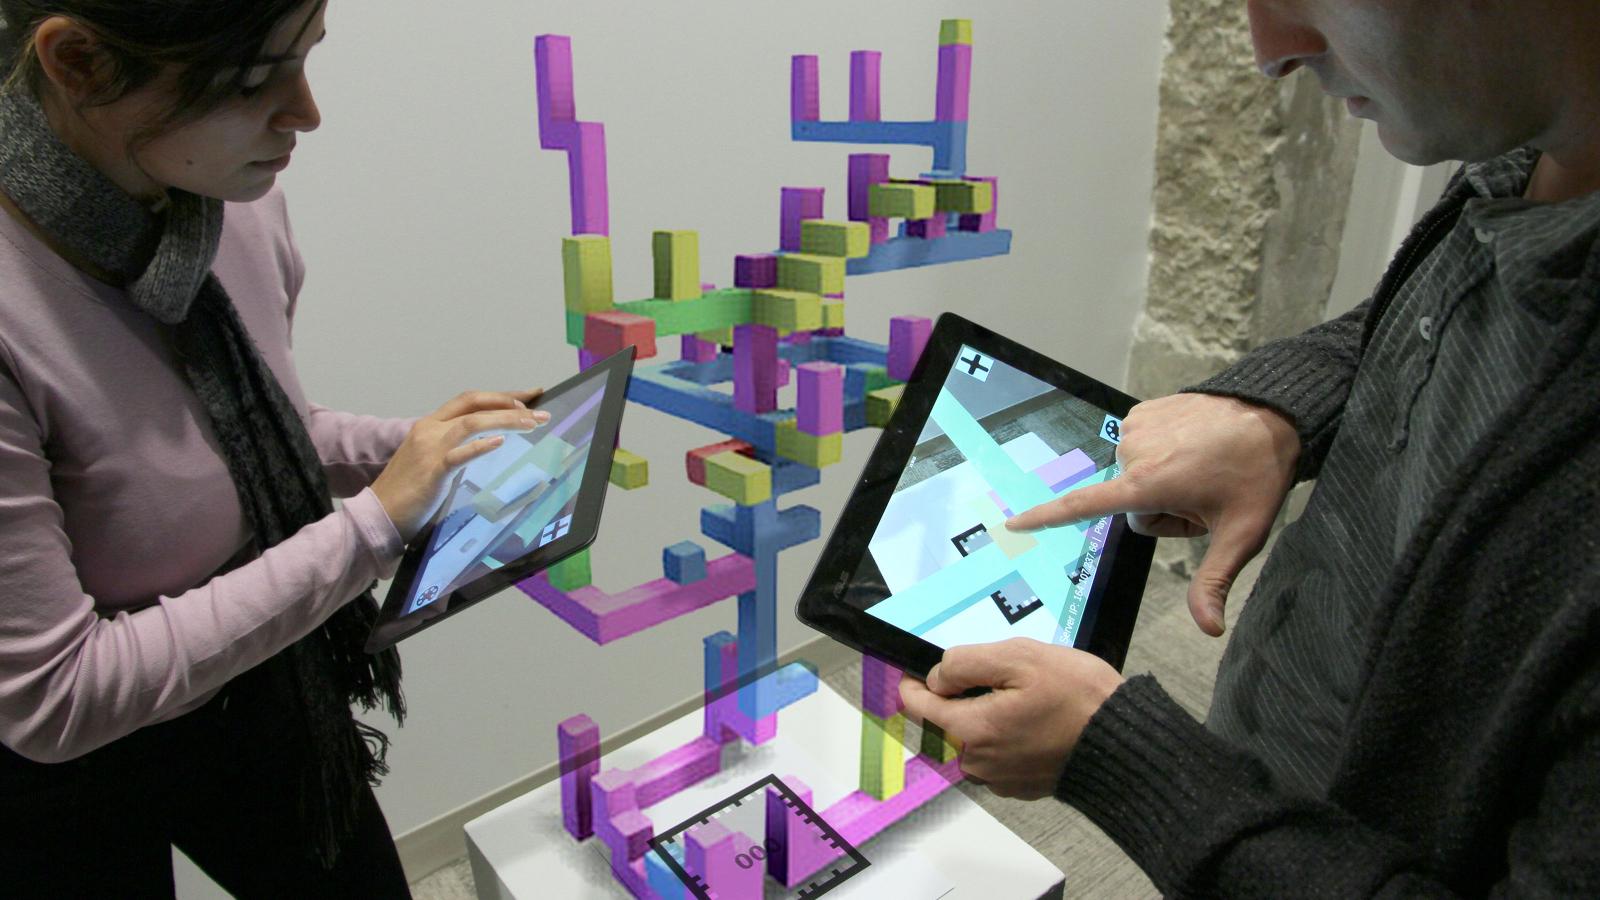 Graduate students interacting with Professor Price's ConstructAR app.